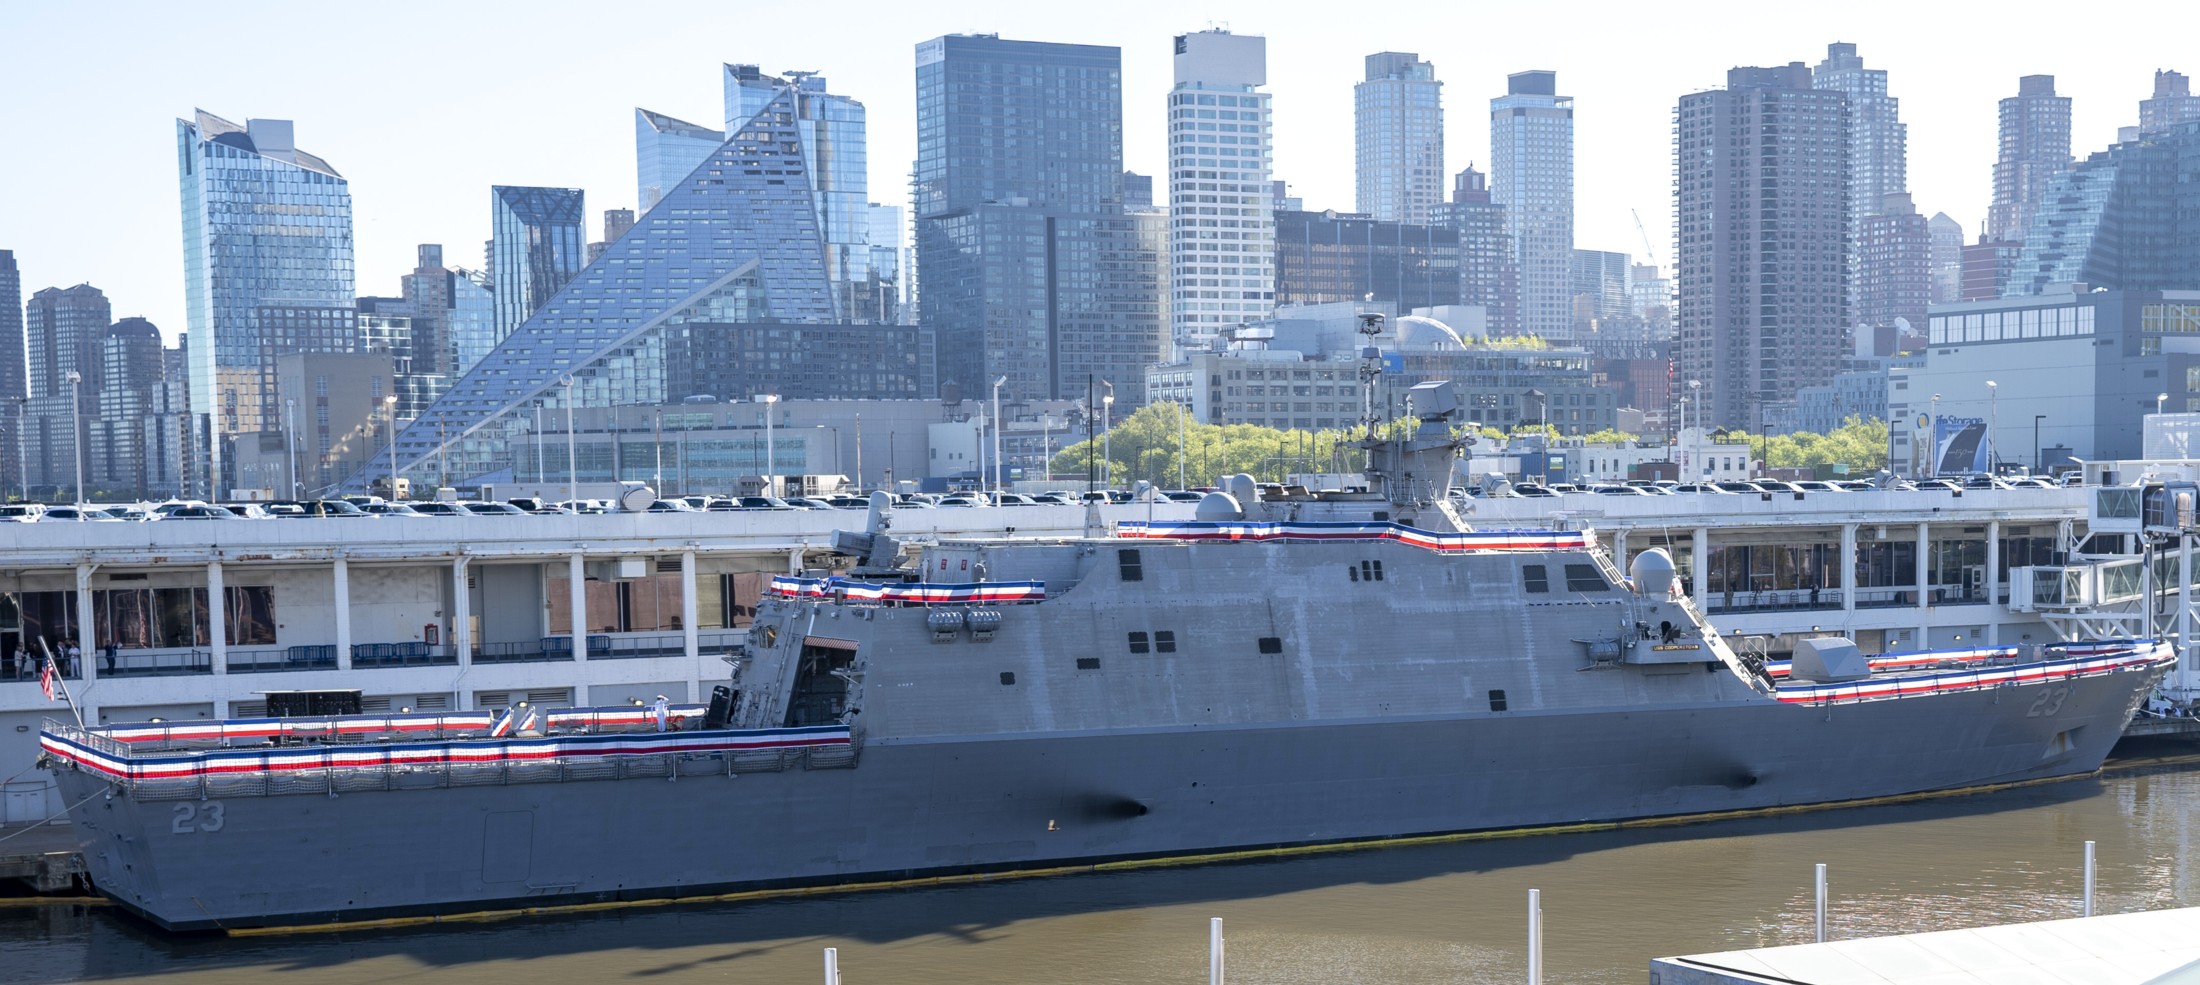 lcs-23 uss cooperstown freedom class littoral combat ship us navy commissioning ceremony new york 25